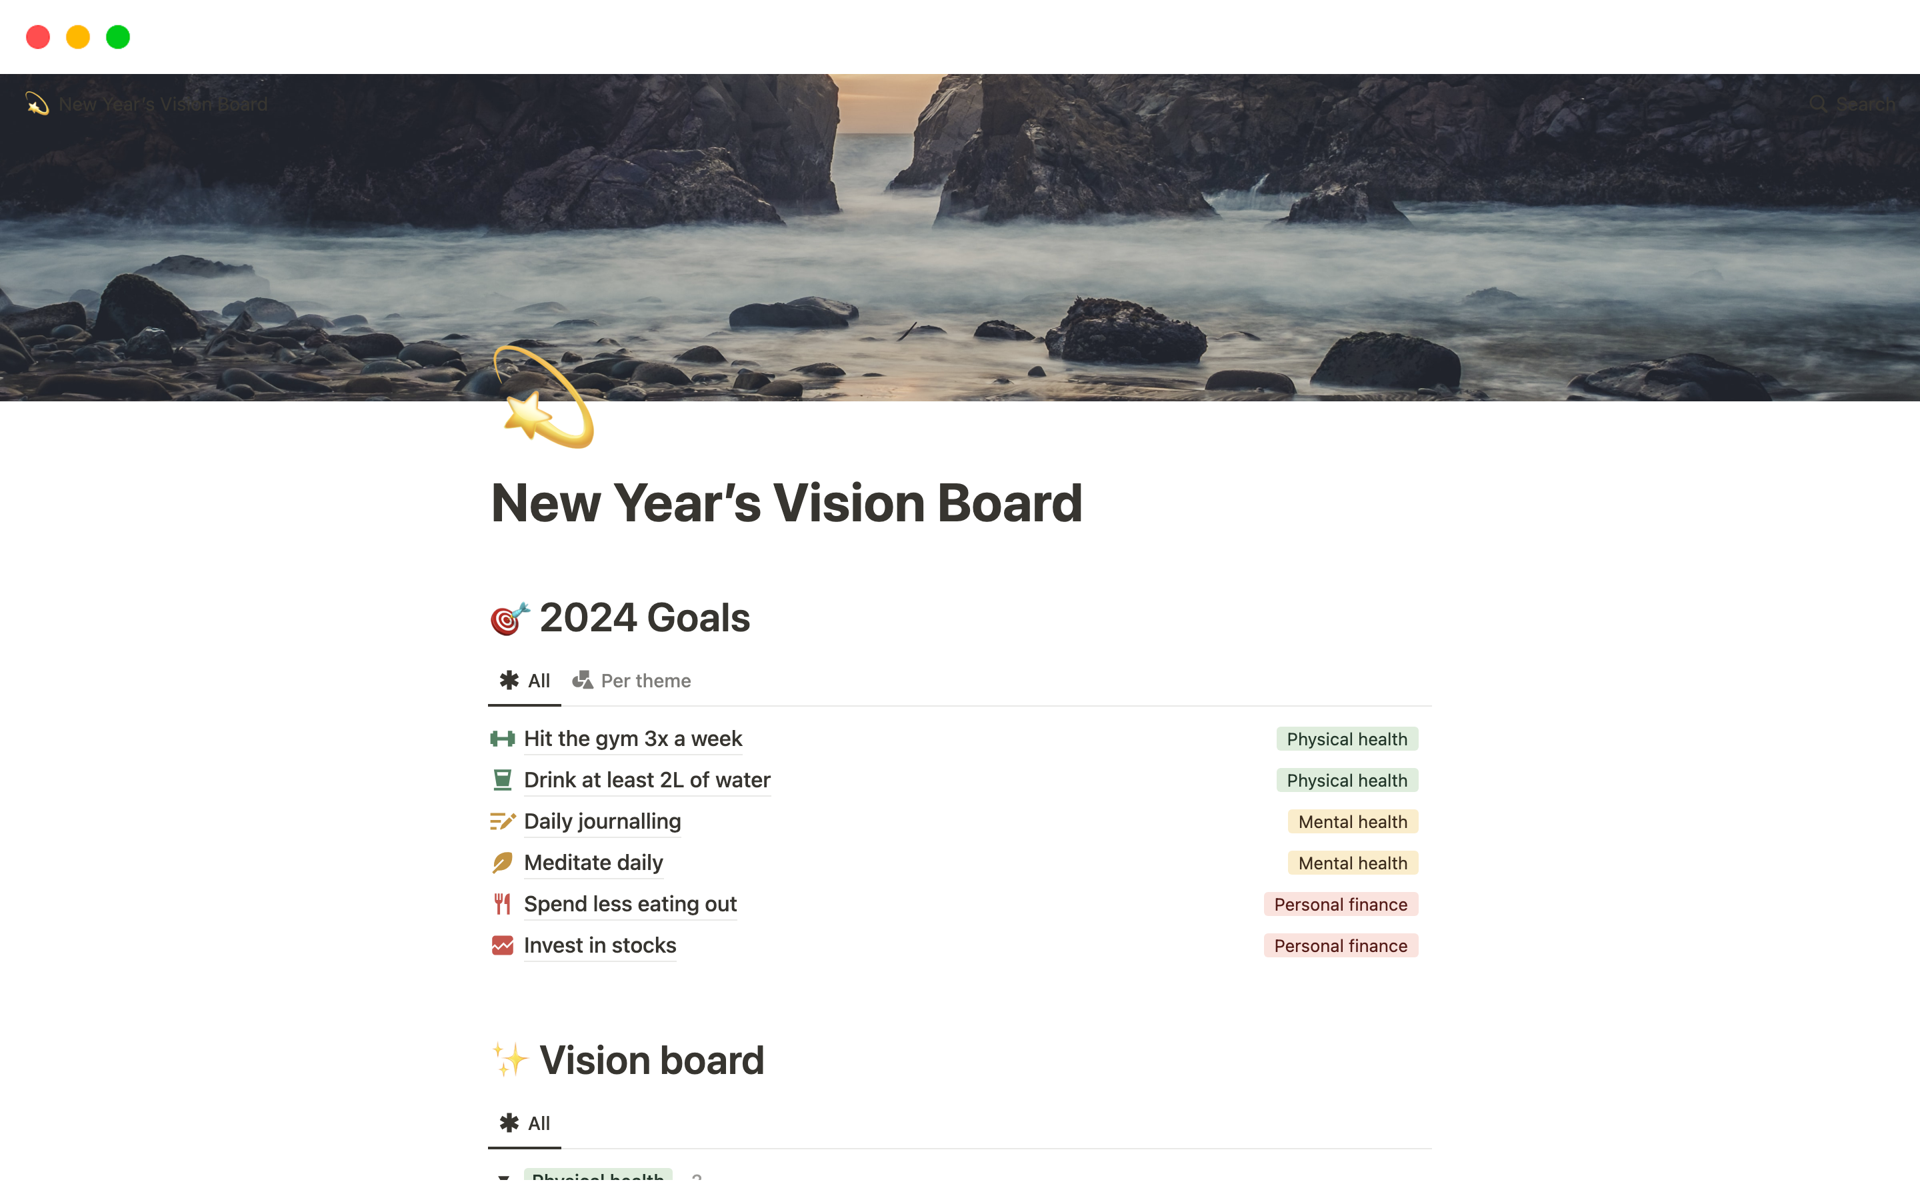 Keep your goals and inspirations top of mind with this vision board you can access anytime.